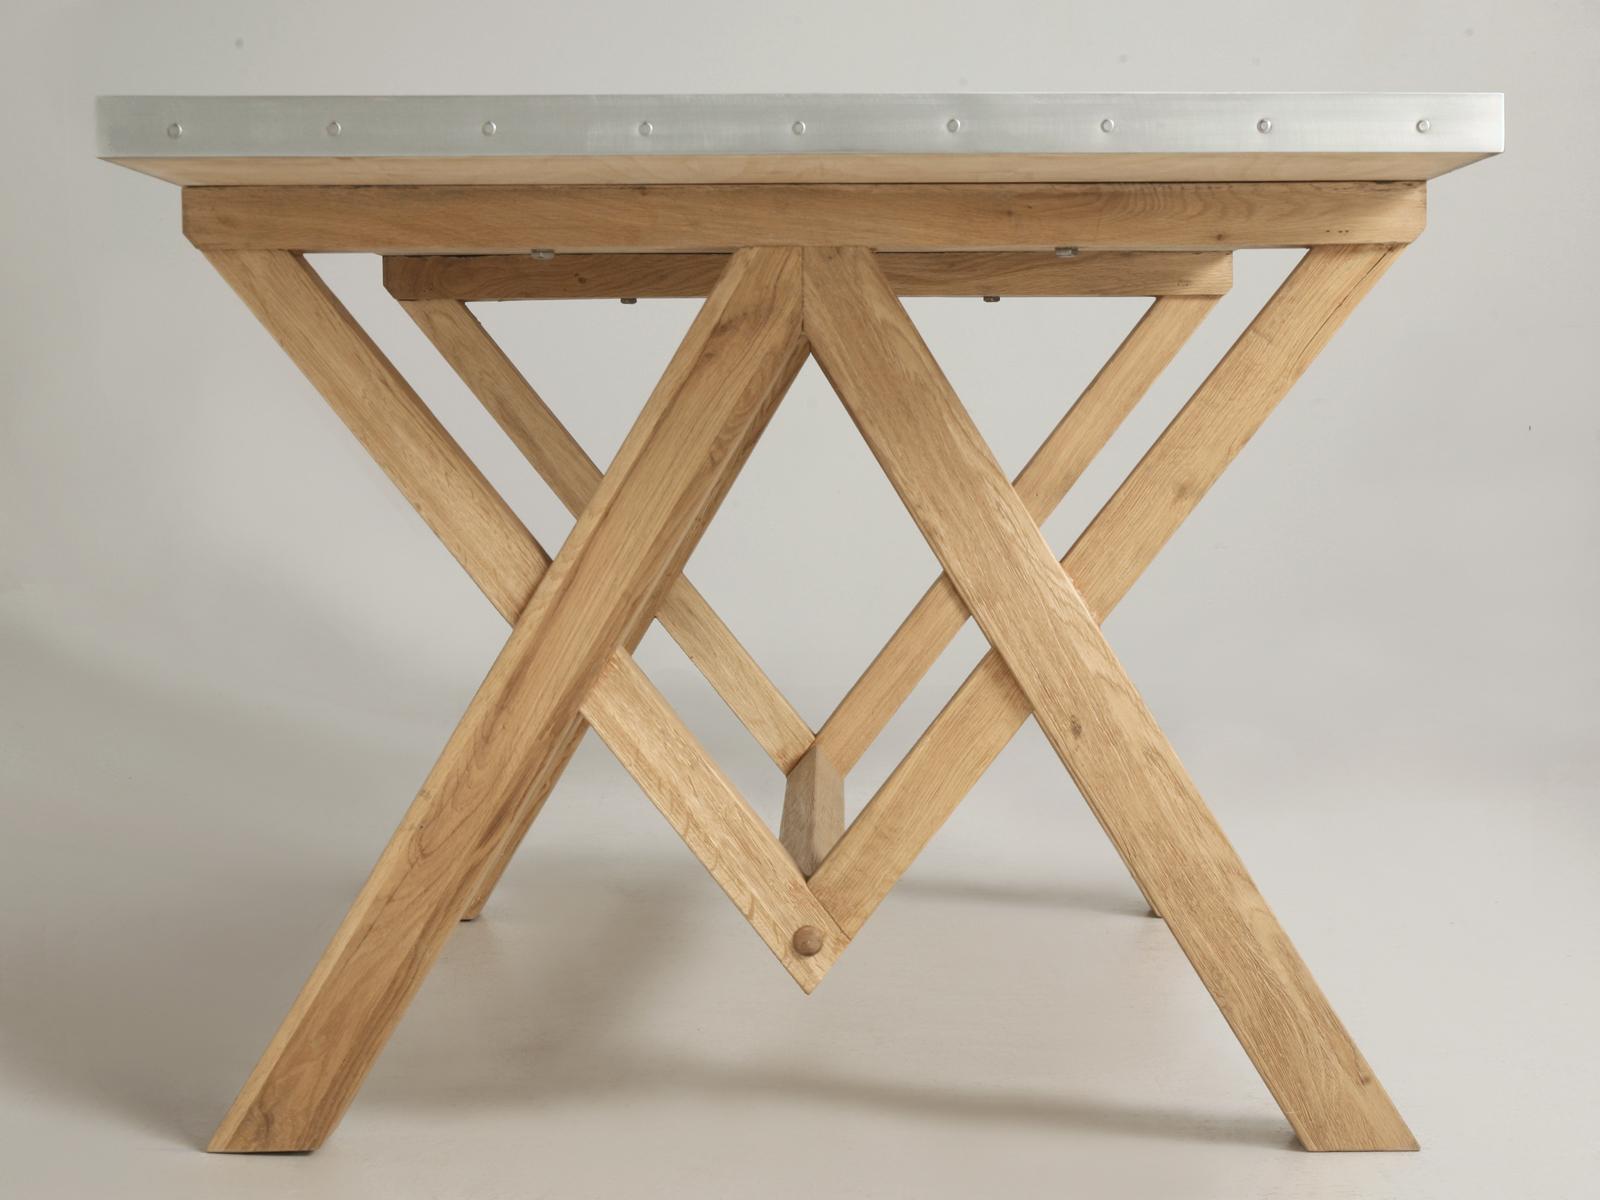 Hand-Crafted Original Zinc Top Farm Style Dining or Kitchen Table in Any Dimension